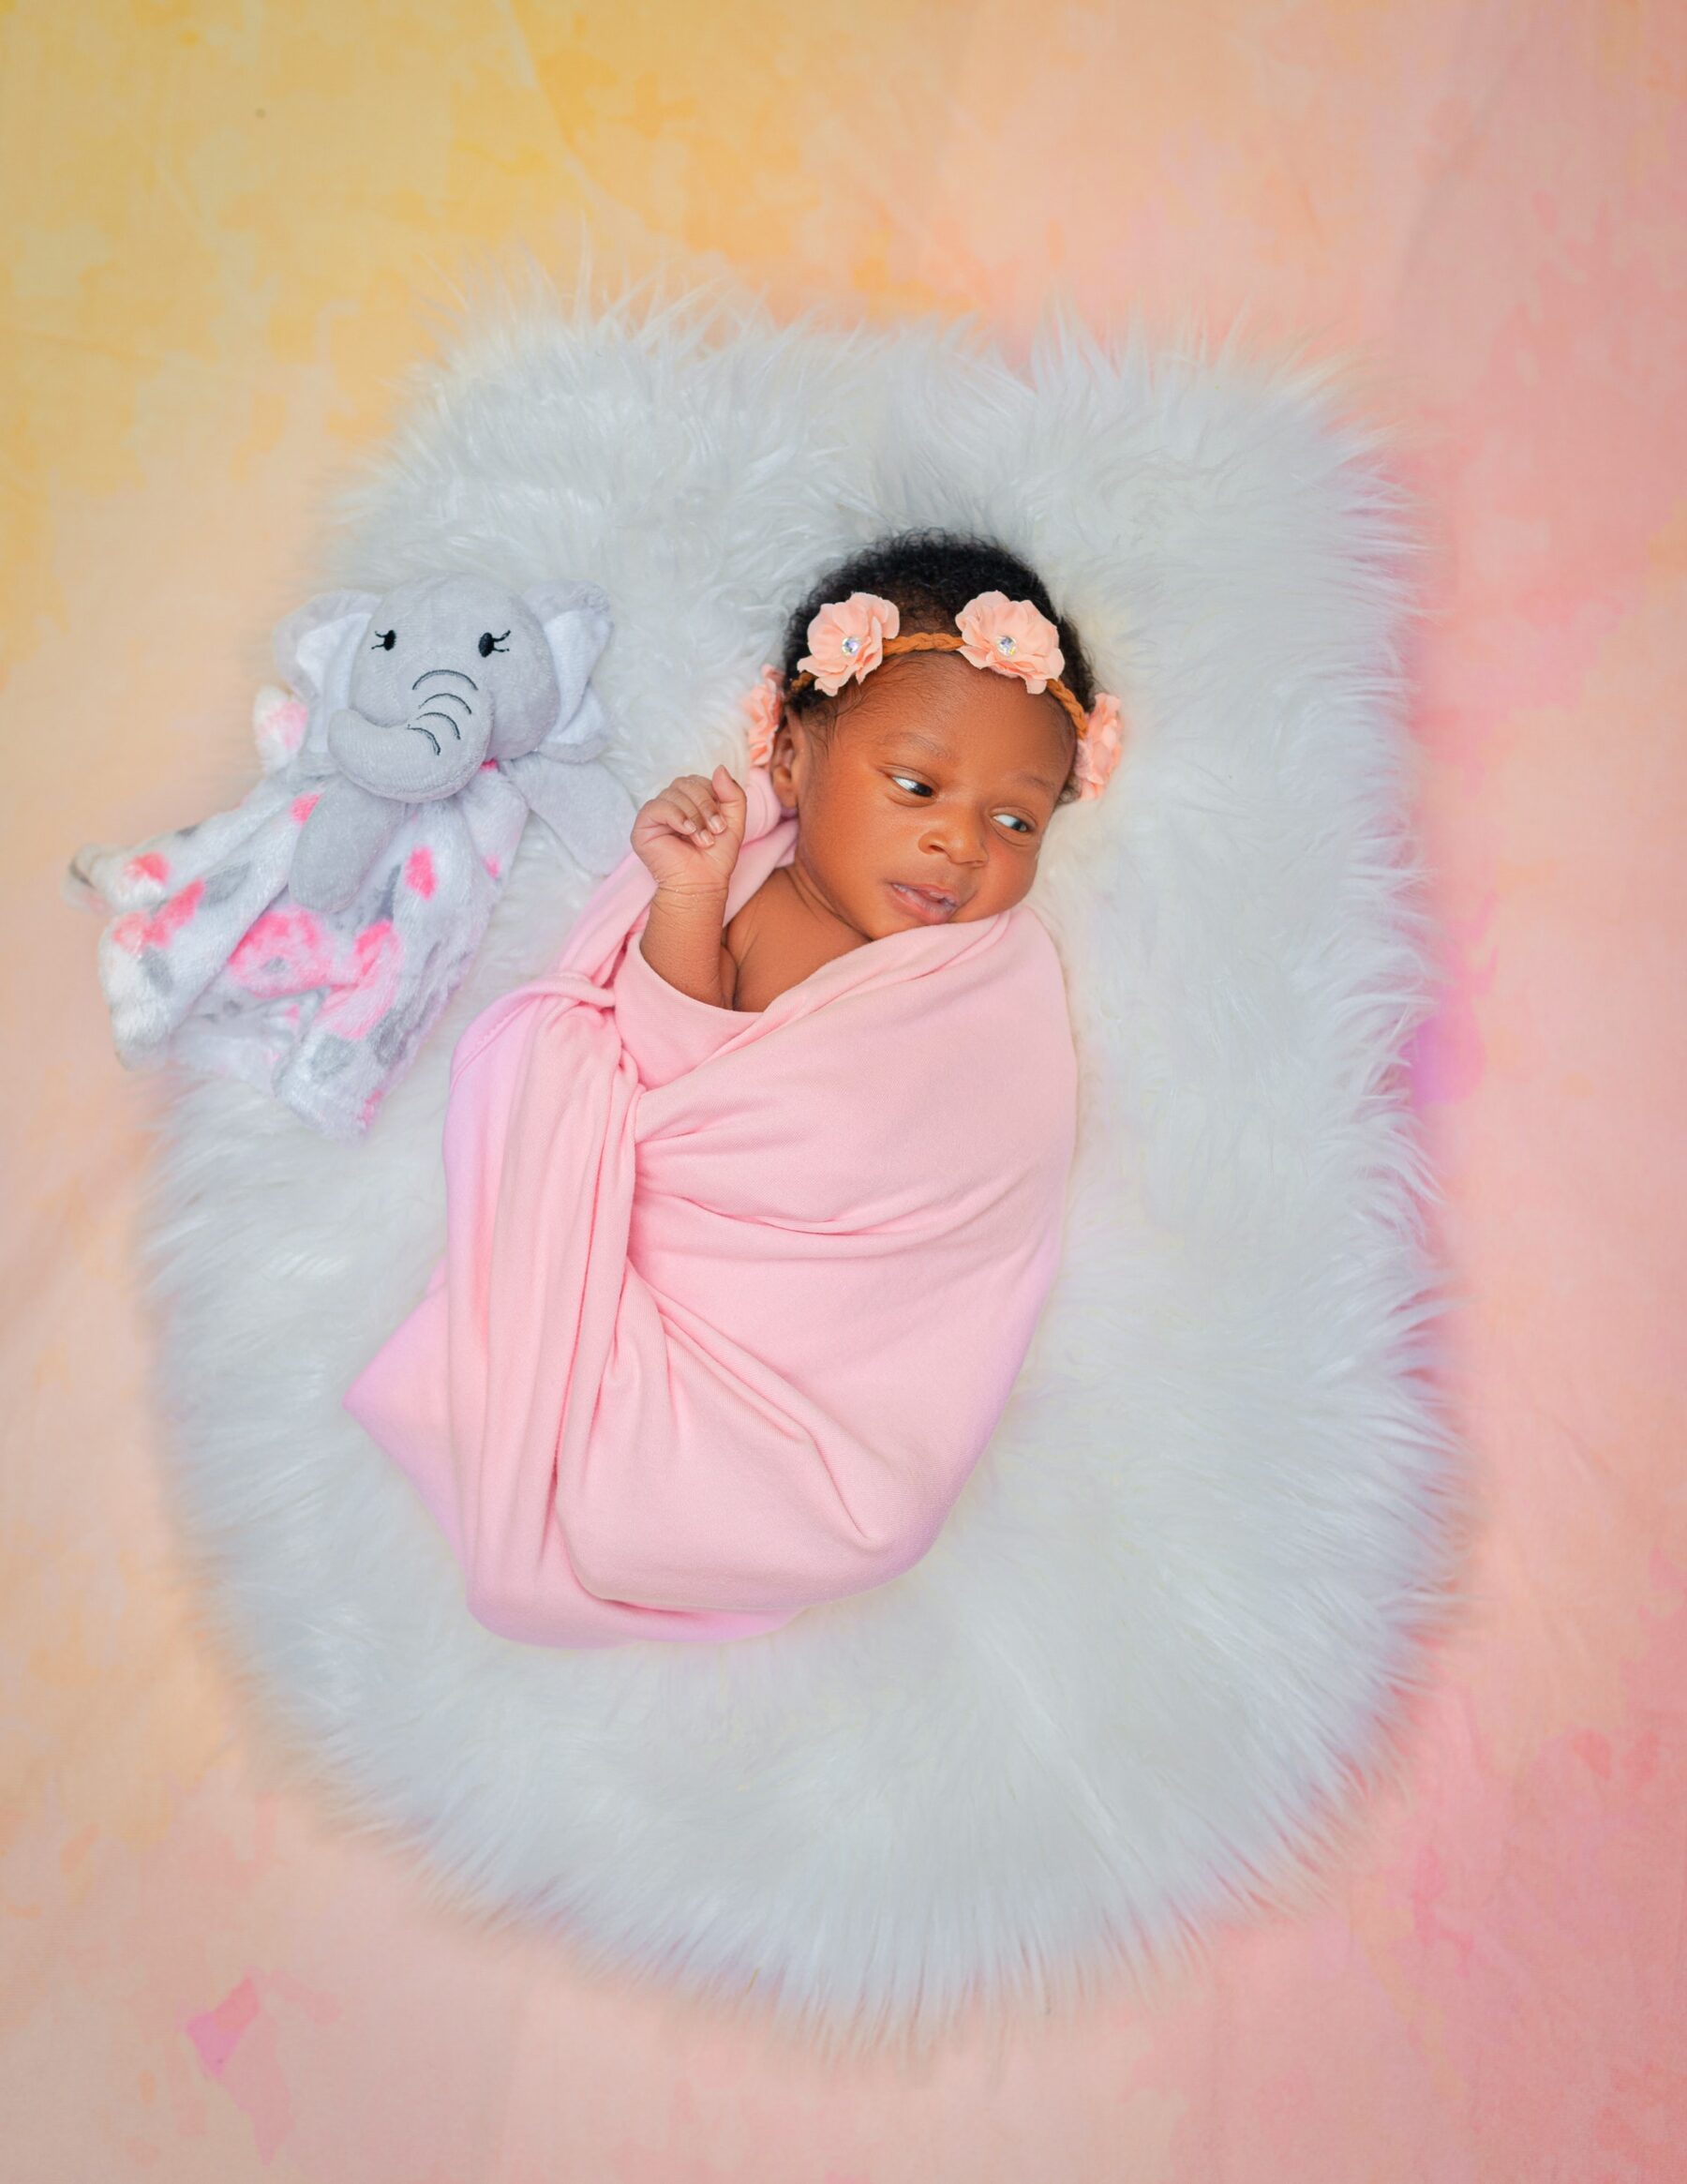 a baby swaddled in a pink blanket with a pink bow in her hair, next to a soft toy and on a soft fluffy grey bed.